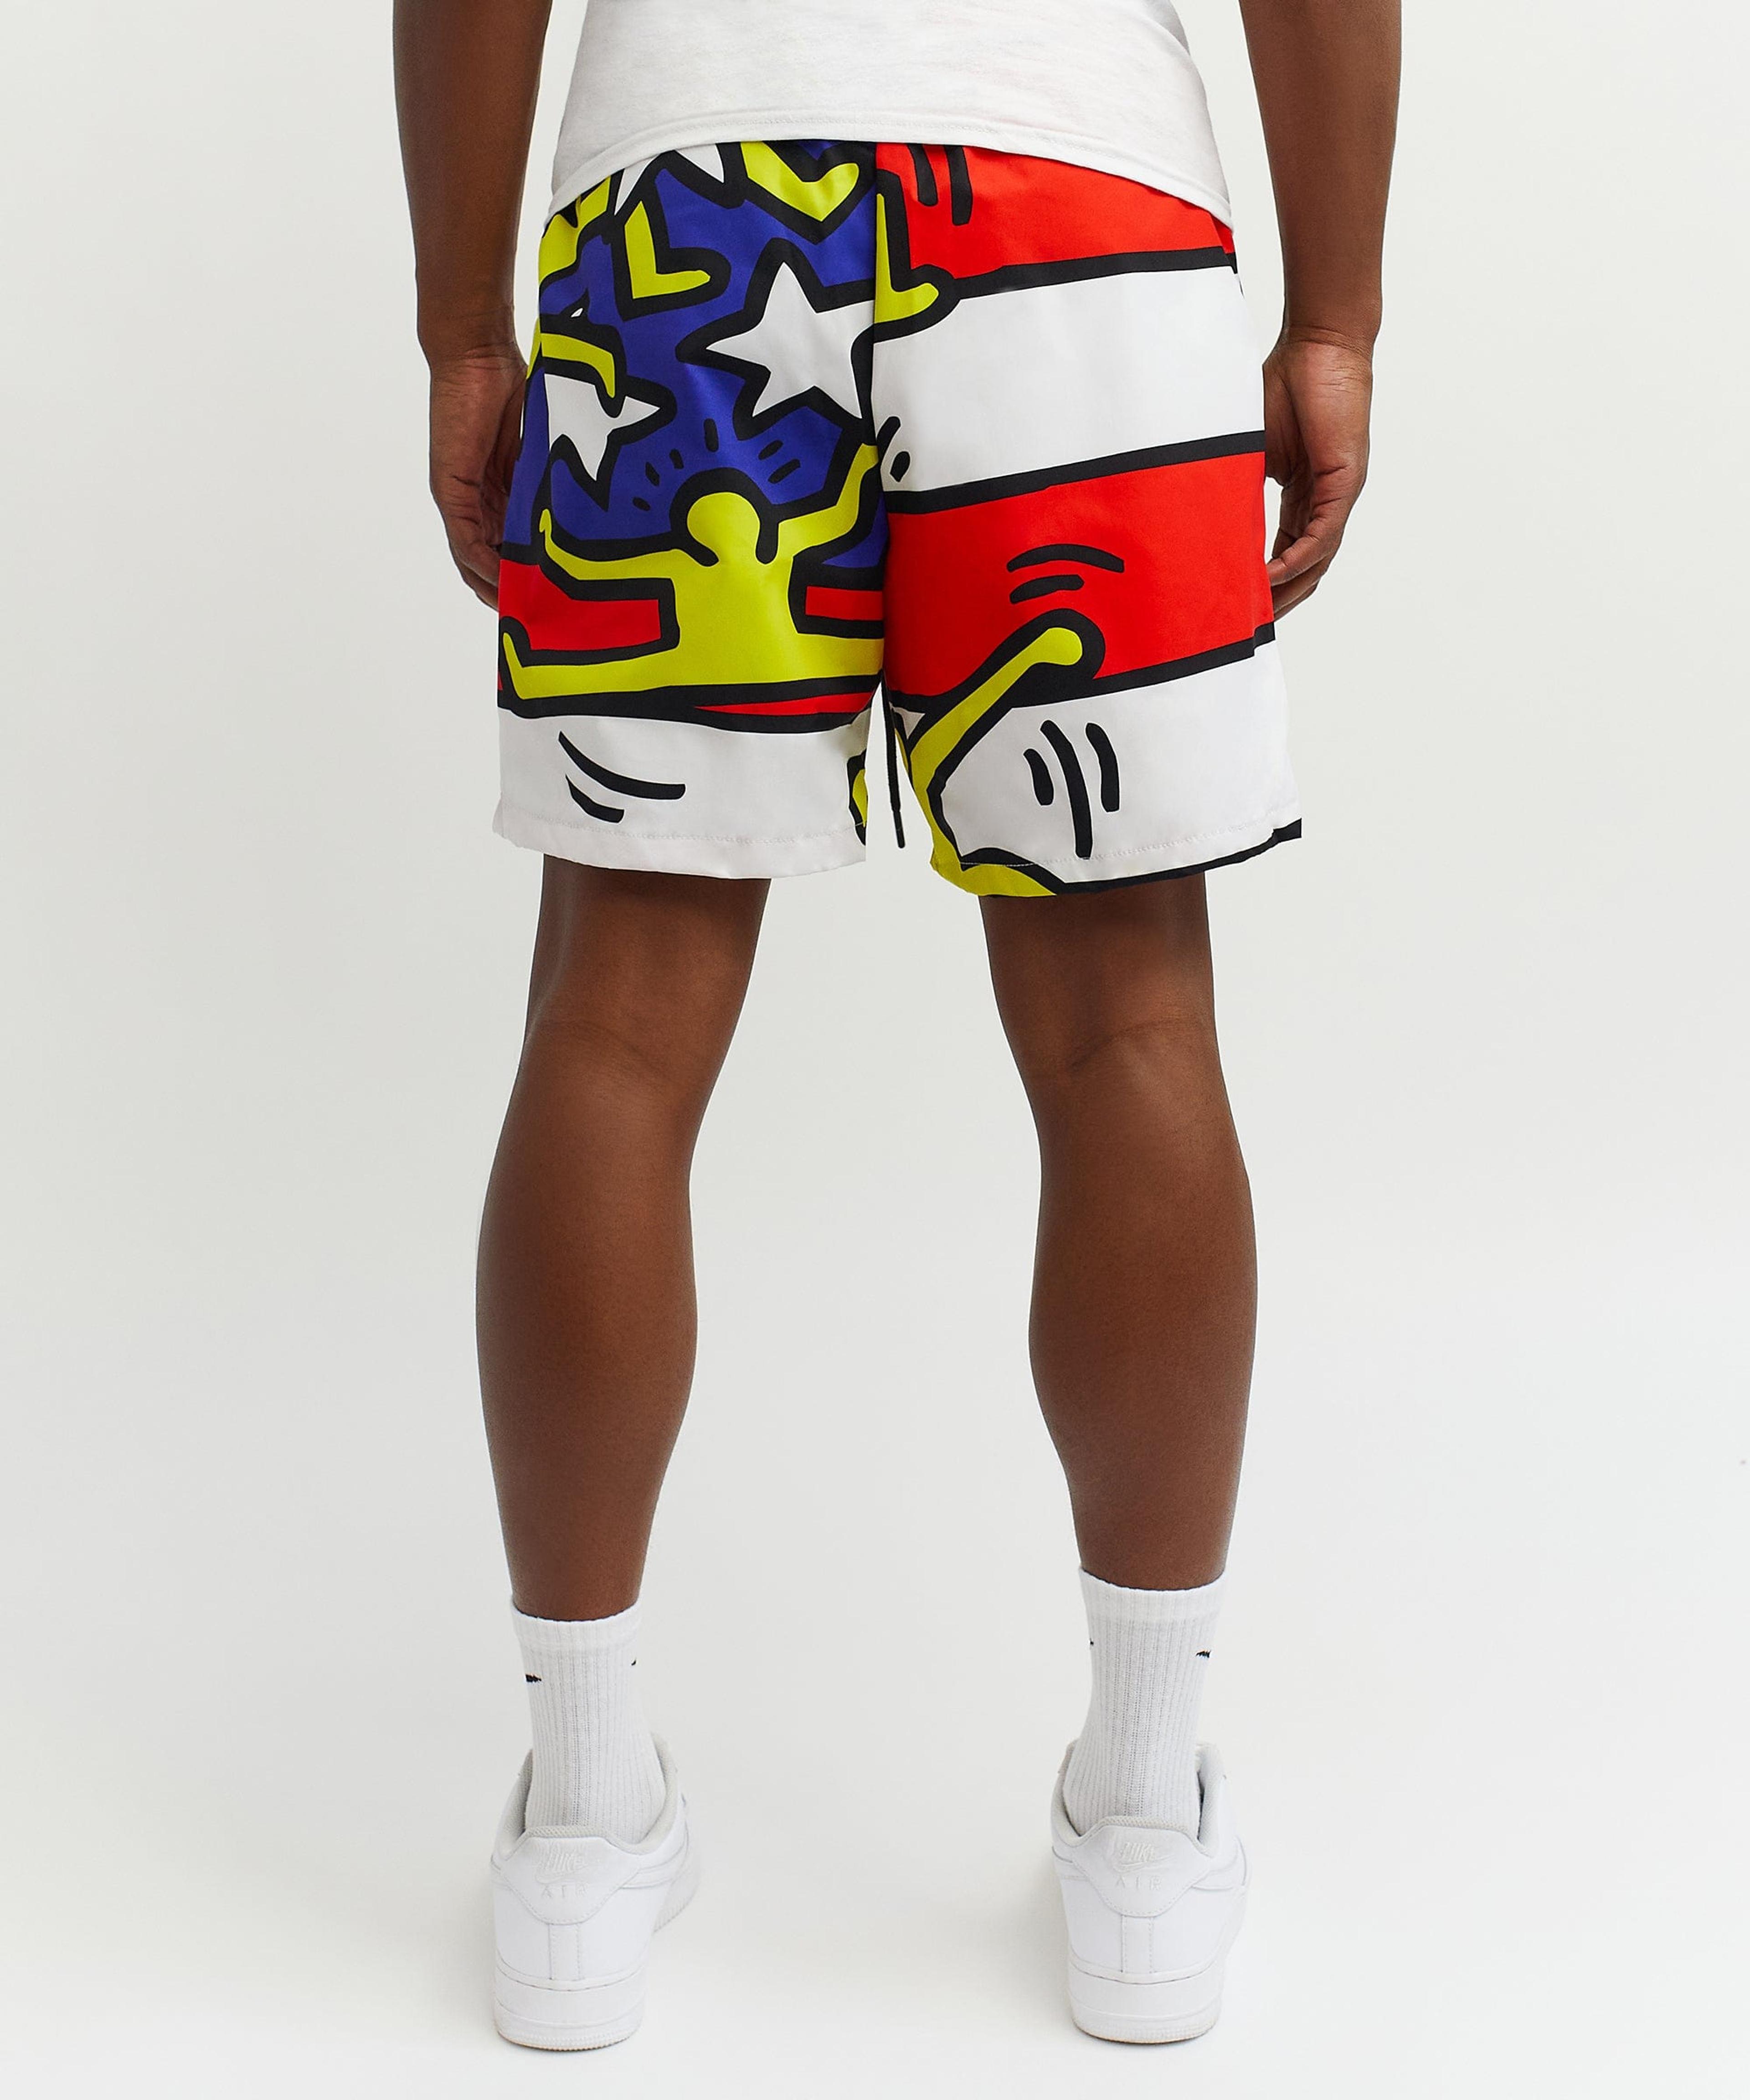 Alternate View 4 of Keith Haring American Flag Shorts